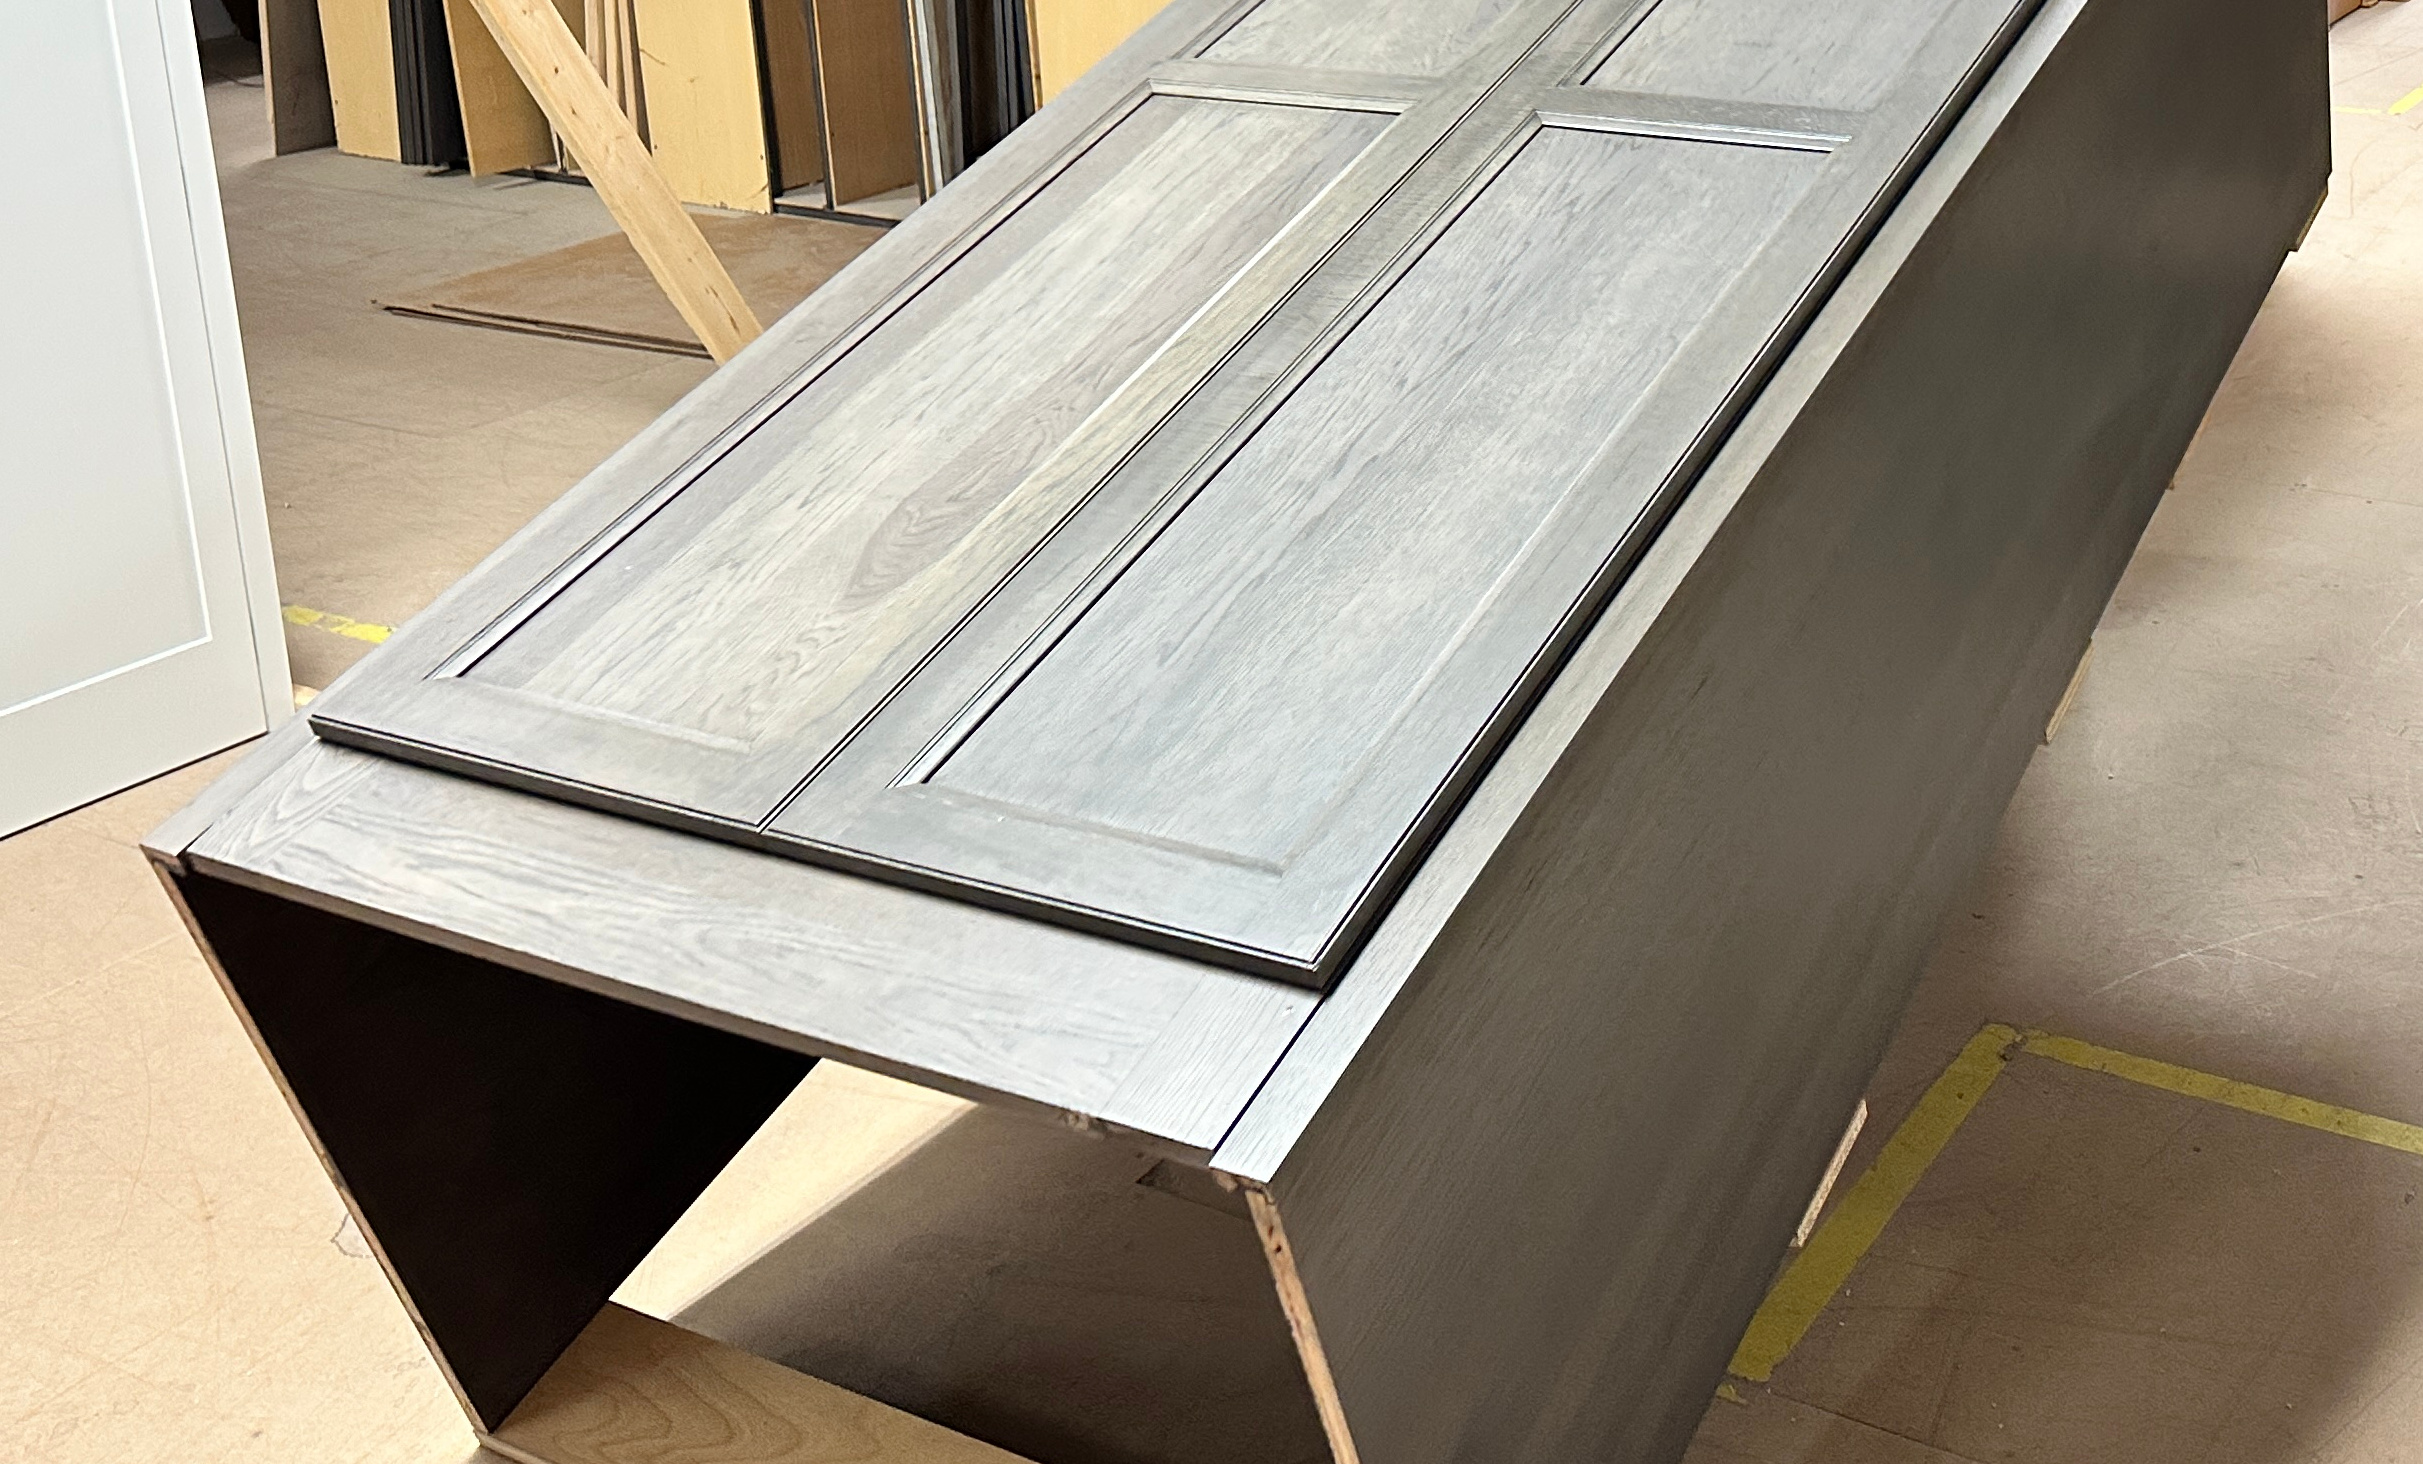 close up view of a gray wooden pantry cabinet. The cabinet is angled upright.